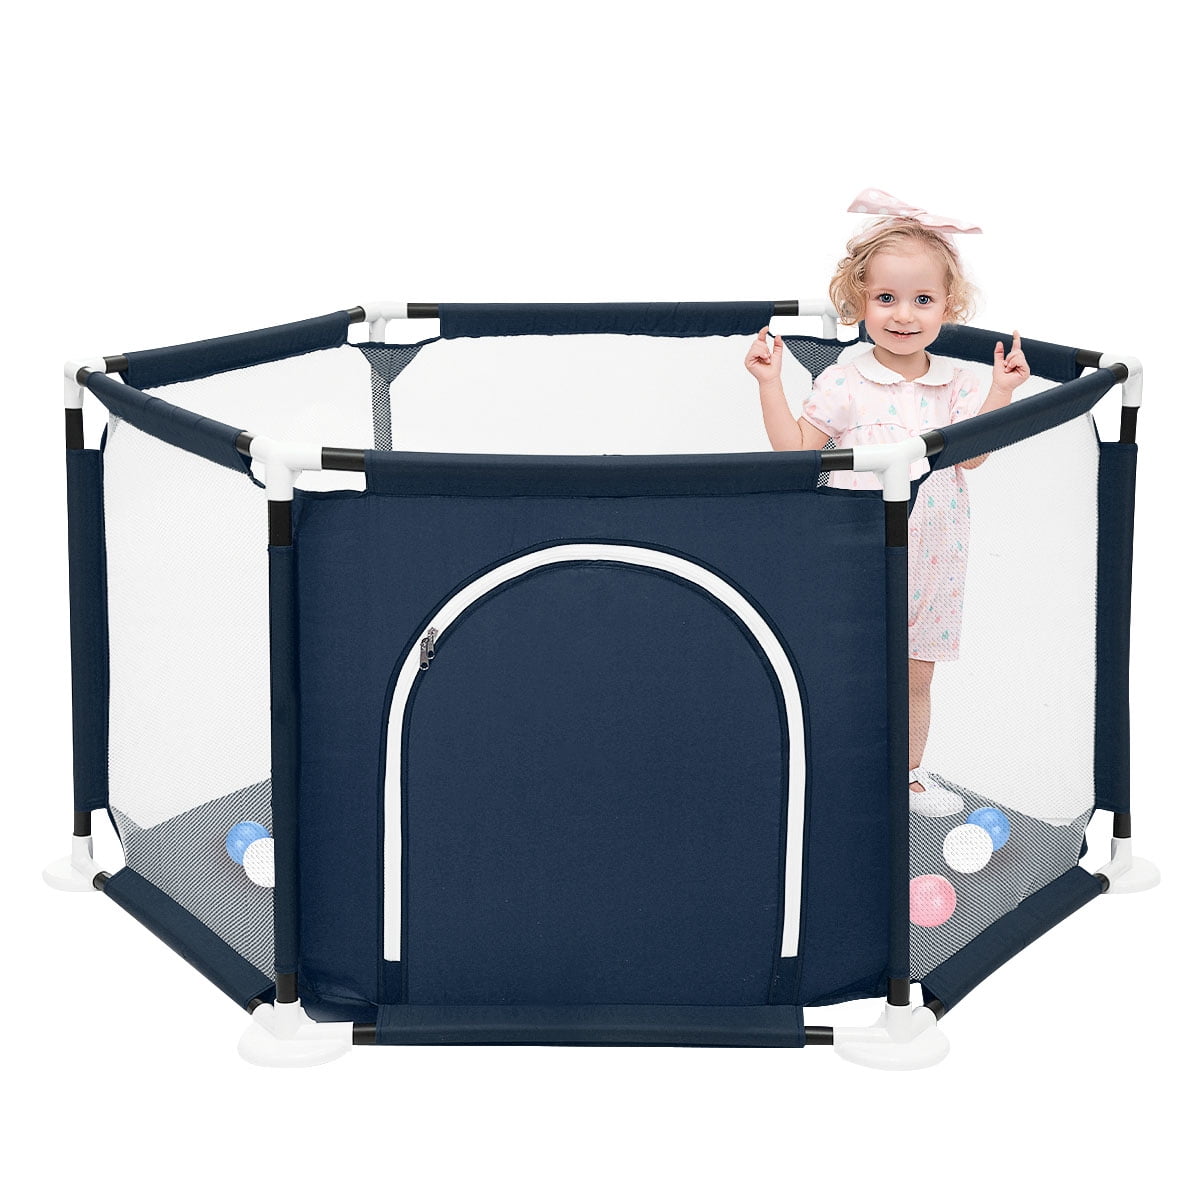 Blue Indoors or Outdoors Child Playpen Fence Playpen for Baby Safety Games Crawling Playpen for Babies Johgee Kids 5-Panel Foldable Portable Baby Playpen 